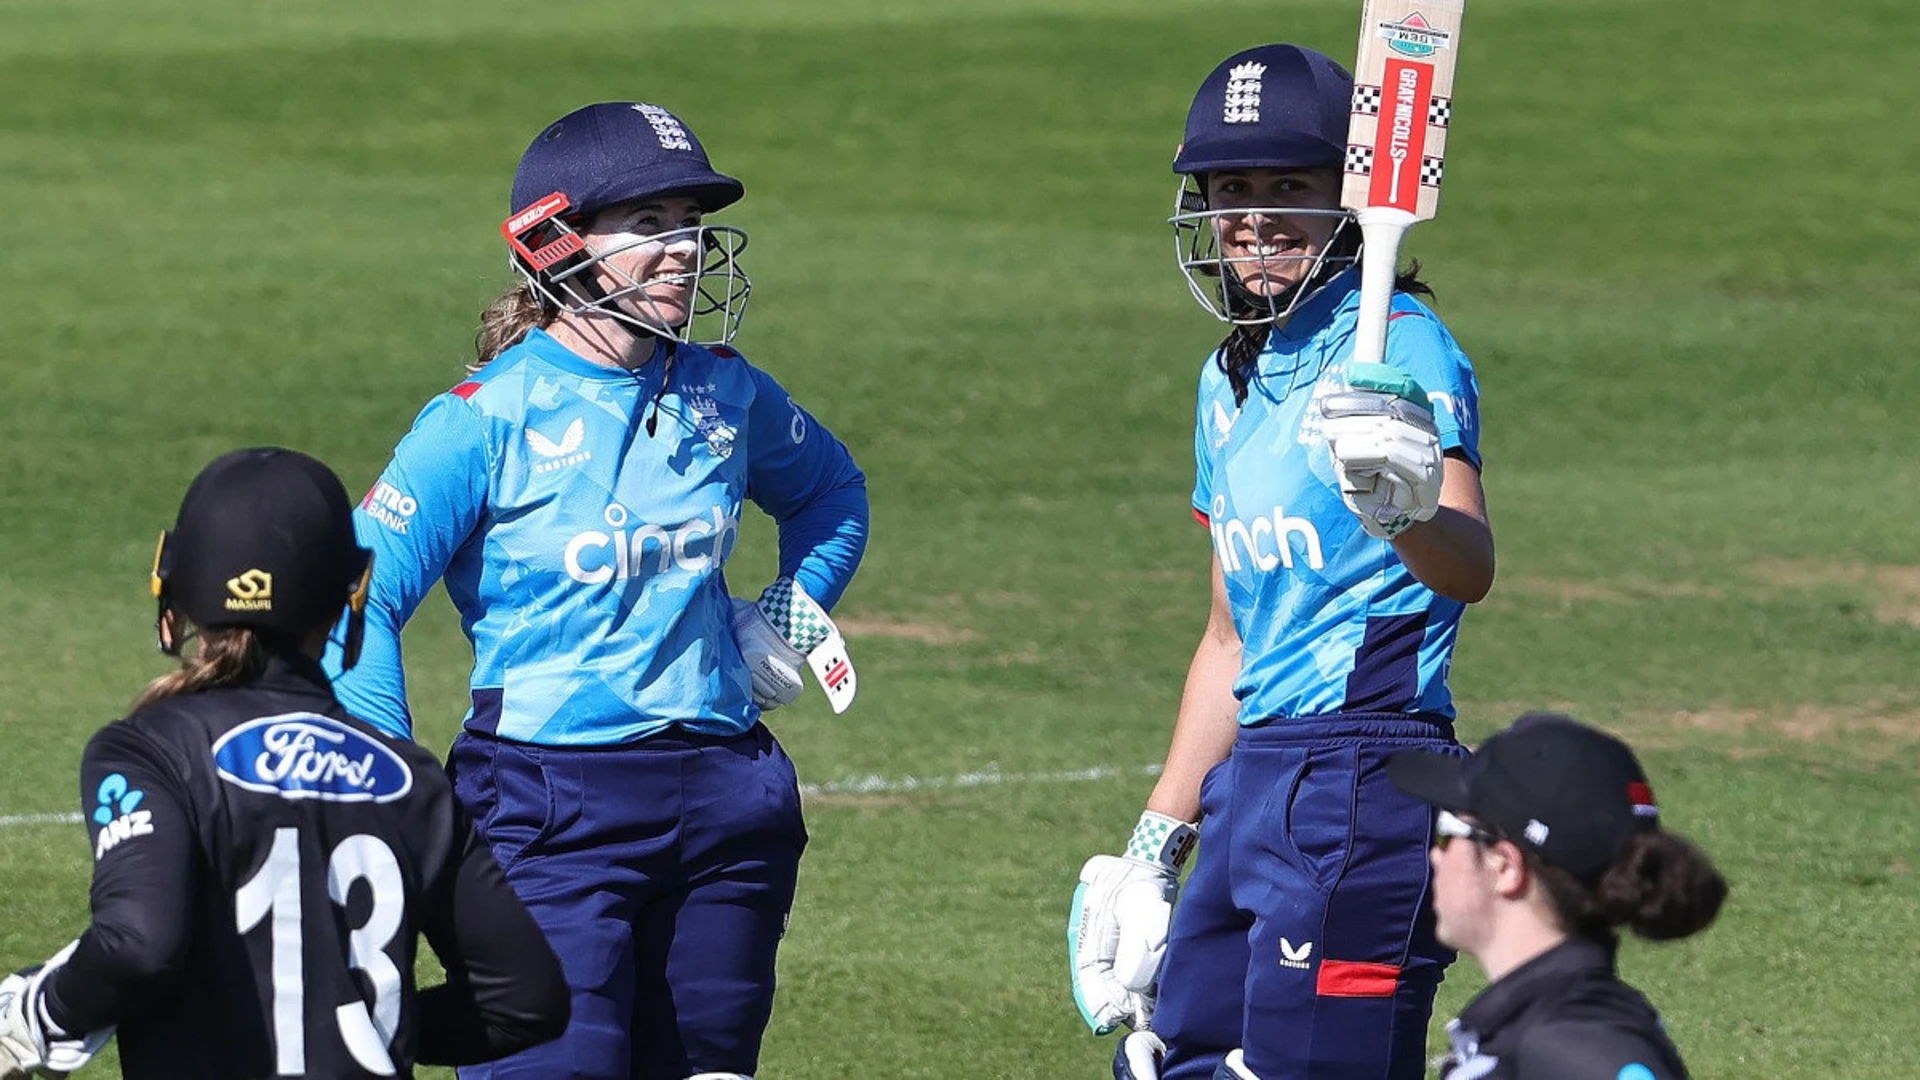 Dean and Beaumont shine in England Women's ODI victory over New Zealand